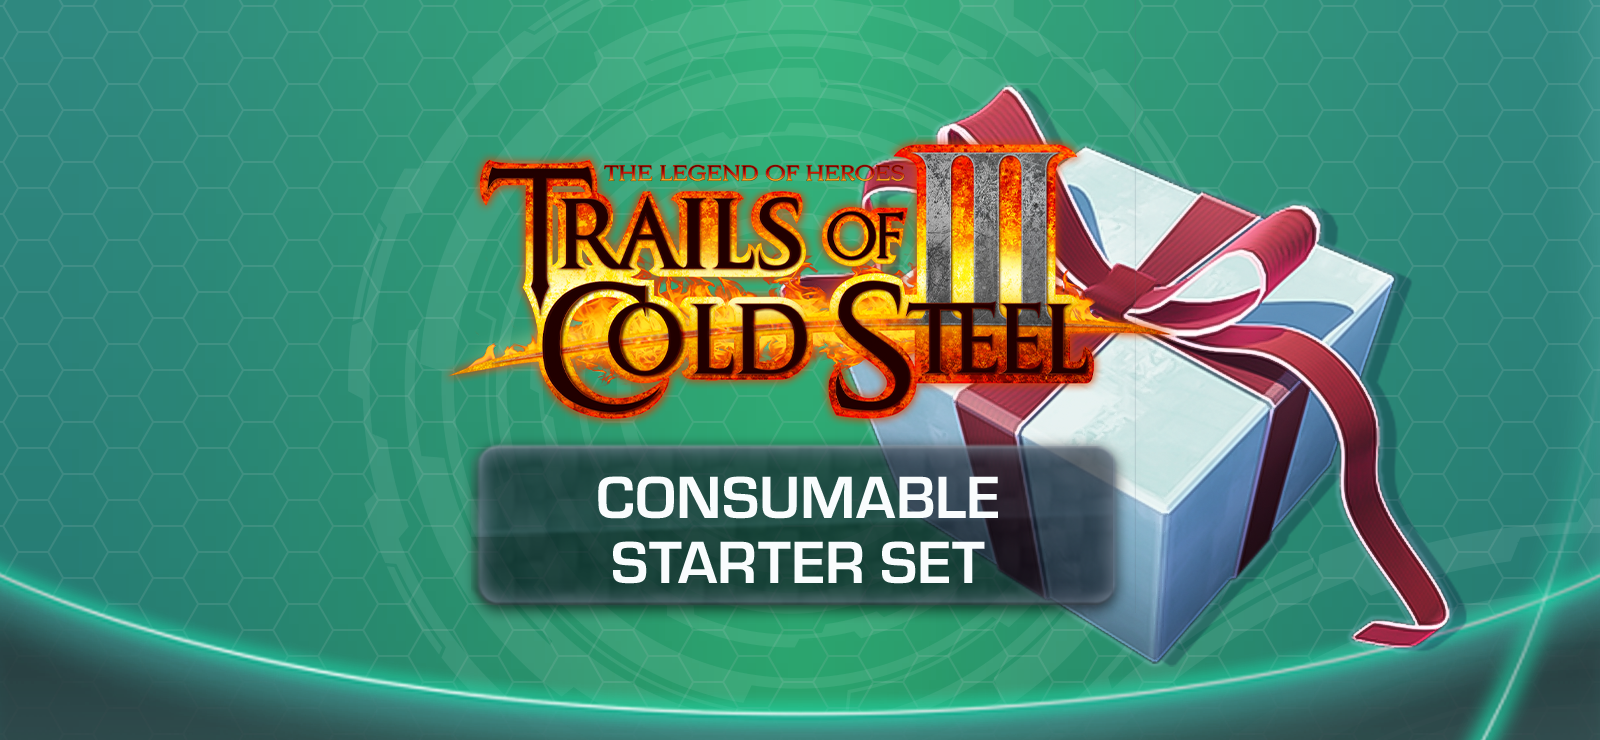 The Legend Of Heroes: Trails Of Cold Steel III - Consumable Starter Set